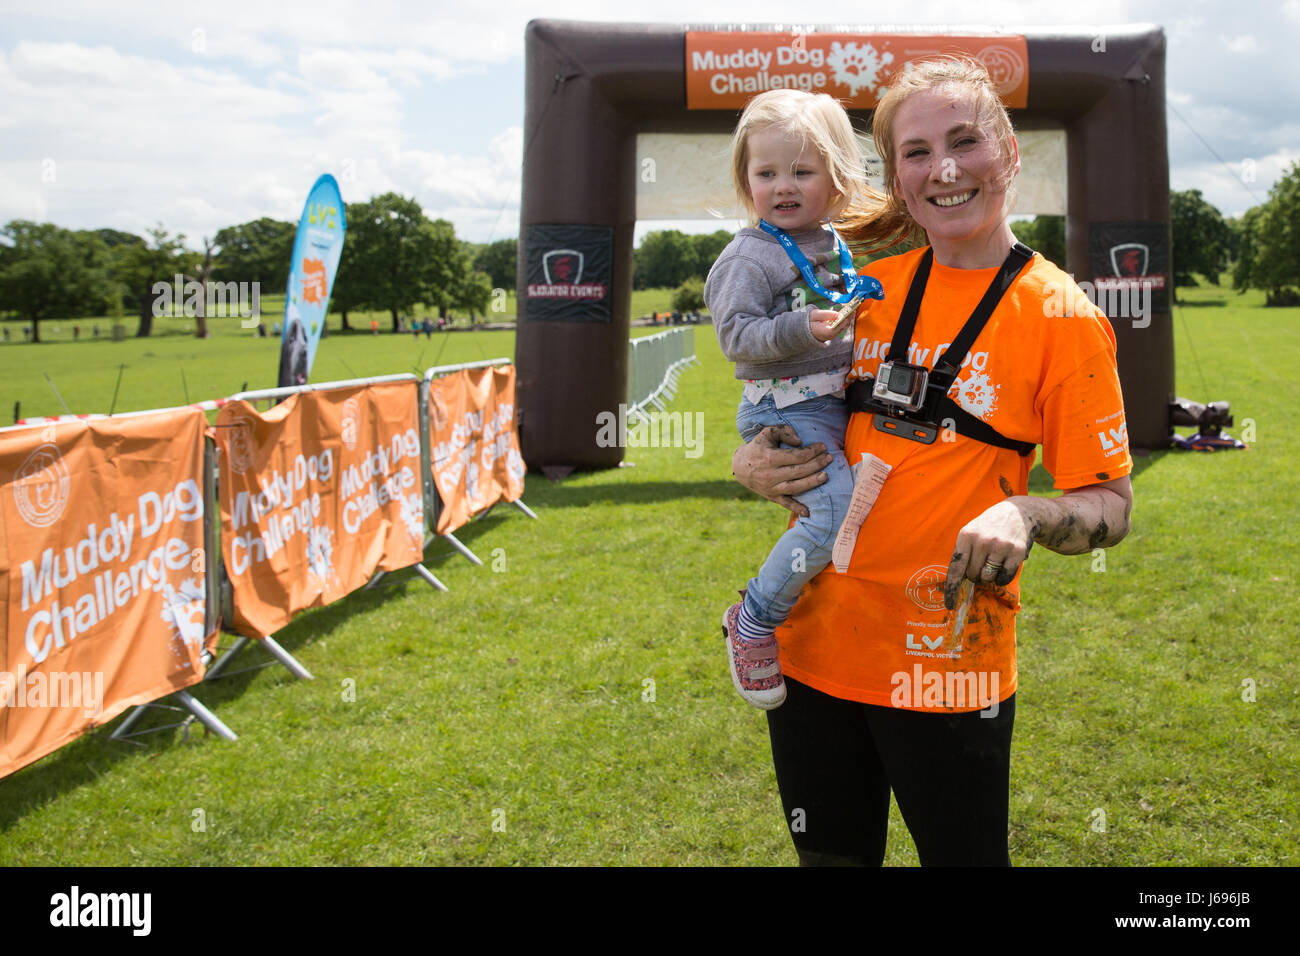 Windsor, UK. 20th May, 2017. Actress Rosie Marcel, who plays consultant cardiothoracic surgeon Jac Taylor in 'Holby City', after competing in the Muddy Dog Challenge obstacle run in Windsor Great Park in aid of Battersea Dogs’ and Cats’ Home. Credit: Mark Kerrison/Alamy Live News Stock Photo